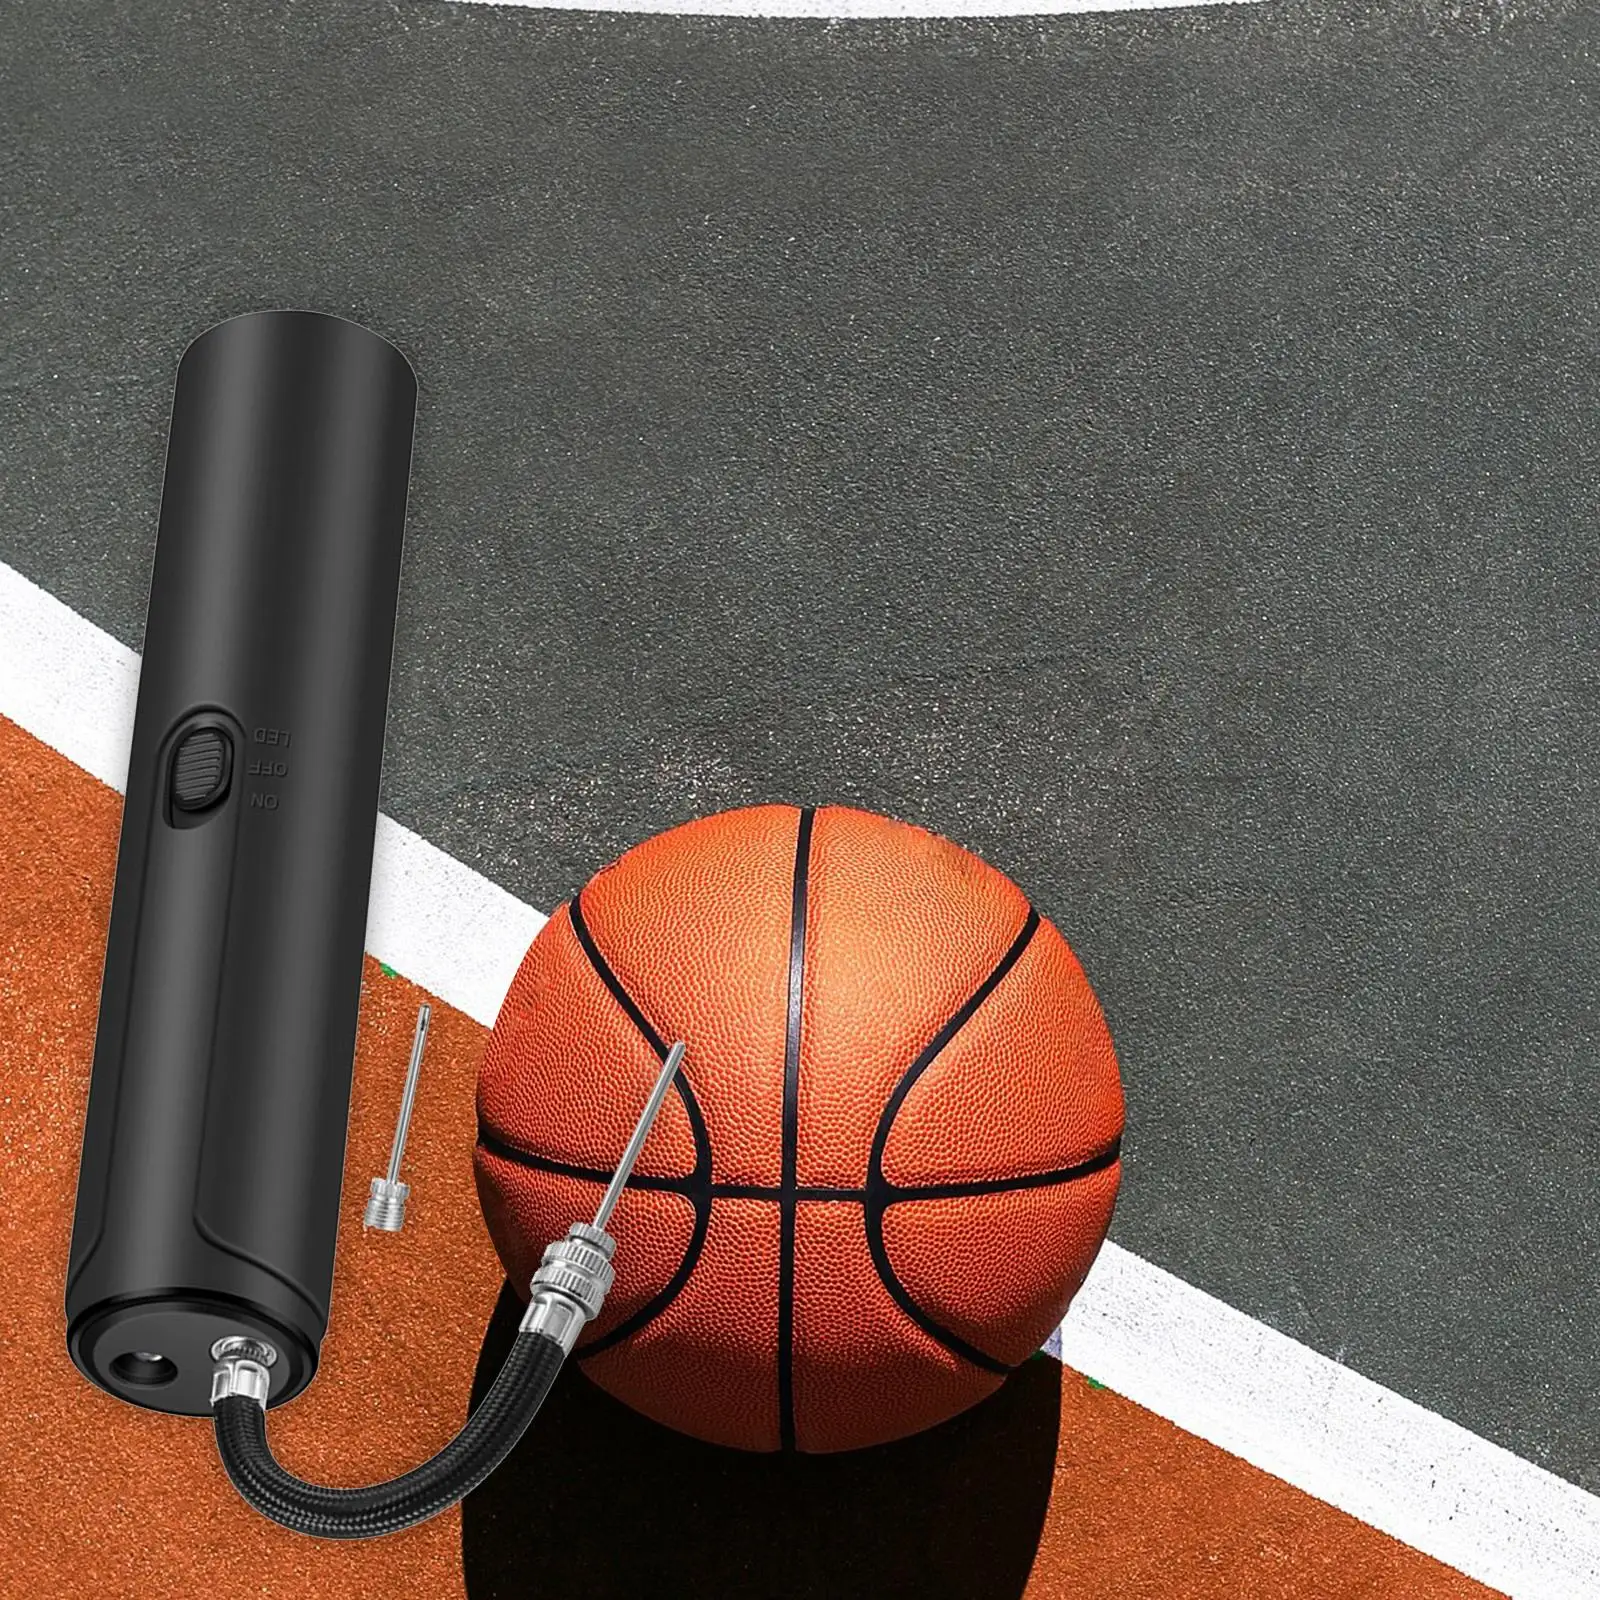 Electric Ball Pump Durable Fast Inflation with Accessories Bike Inflator for Sports Balls Basketball Rugby Ball Volleyball Toys